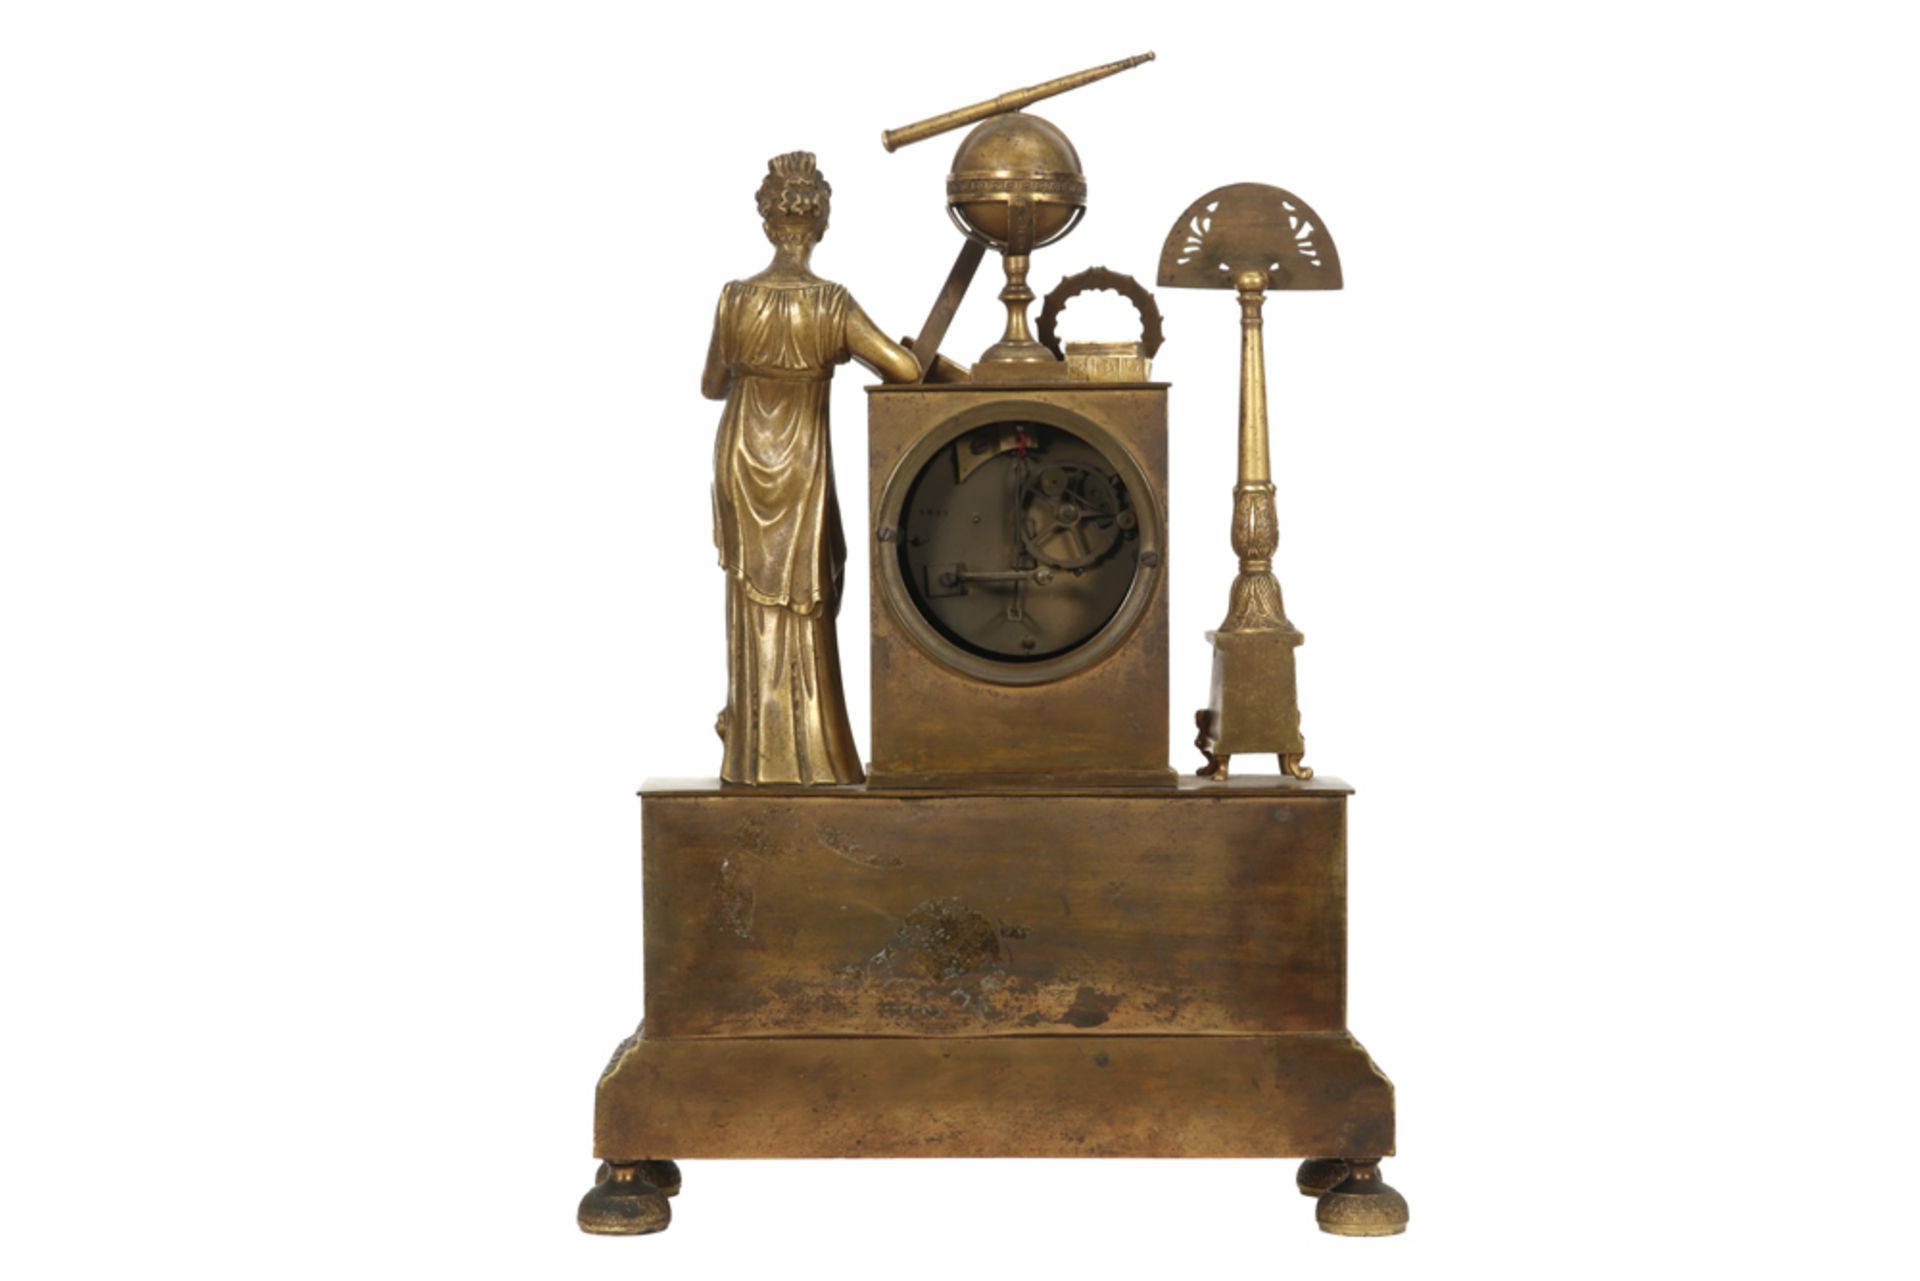 early 19th Cent. Empire style clock with its case in gilded bronze with a lady with all kinds of - Image 4 of 4